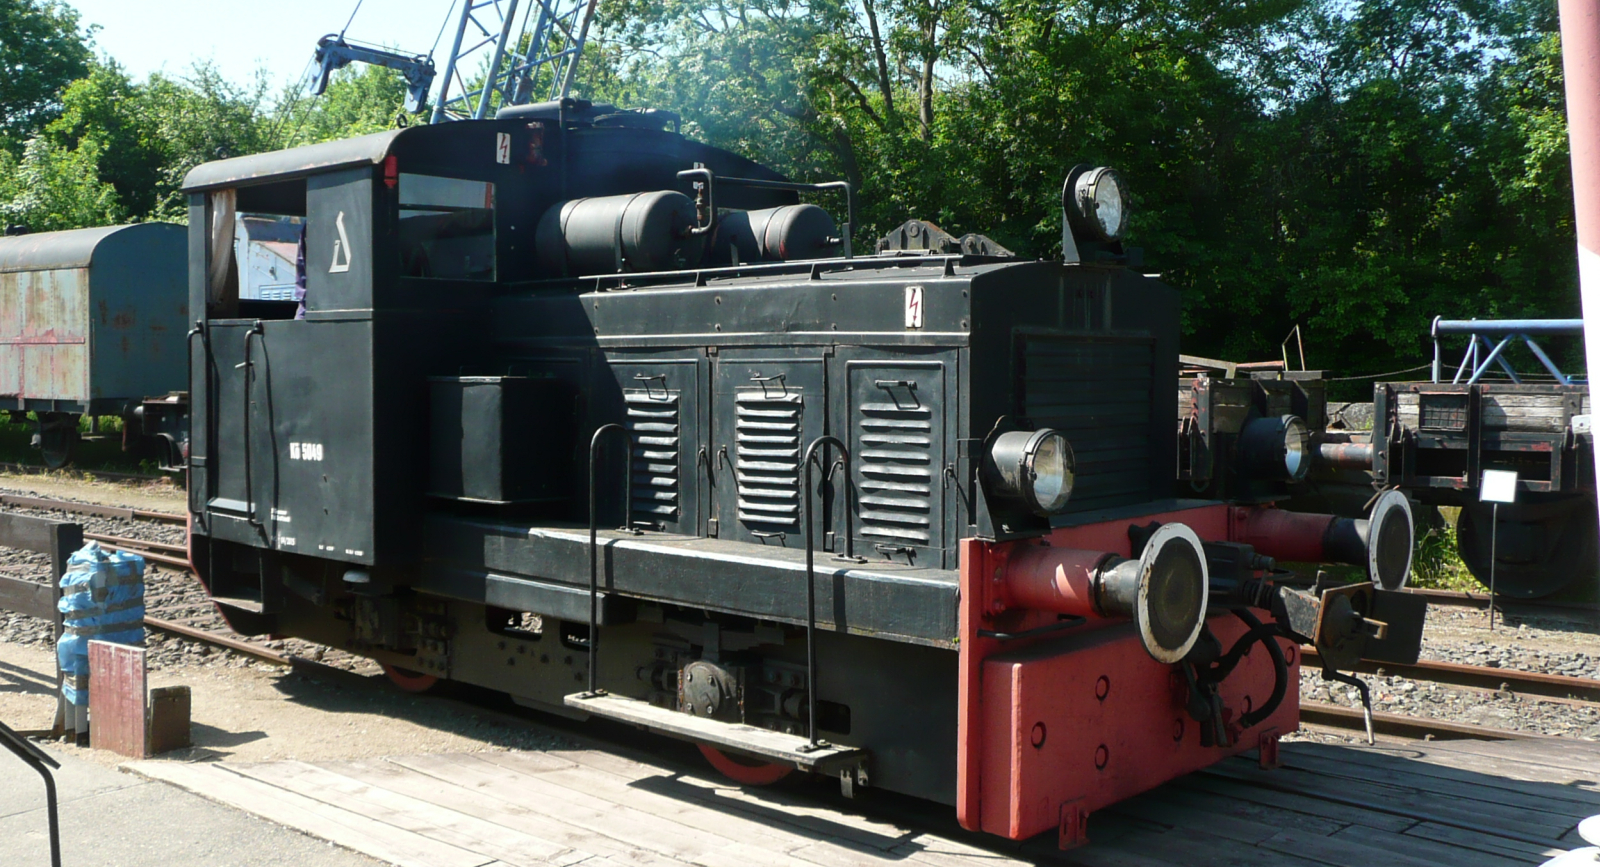 Kö 5049 in the Railway Museum in Gramzow